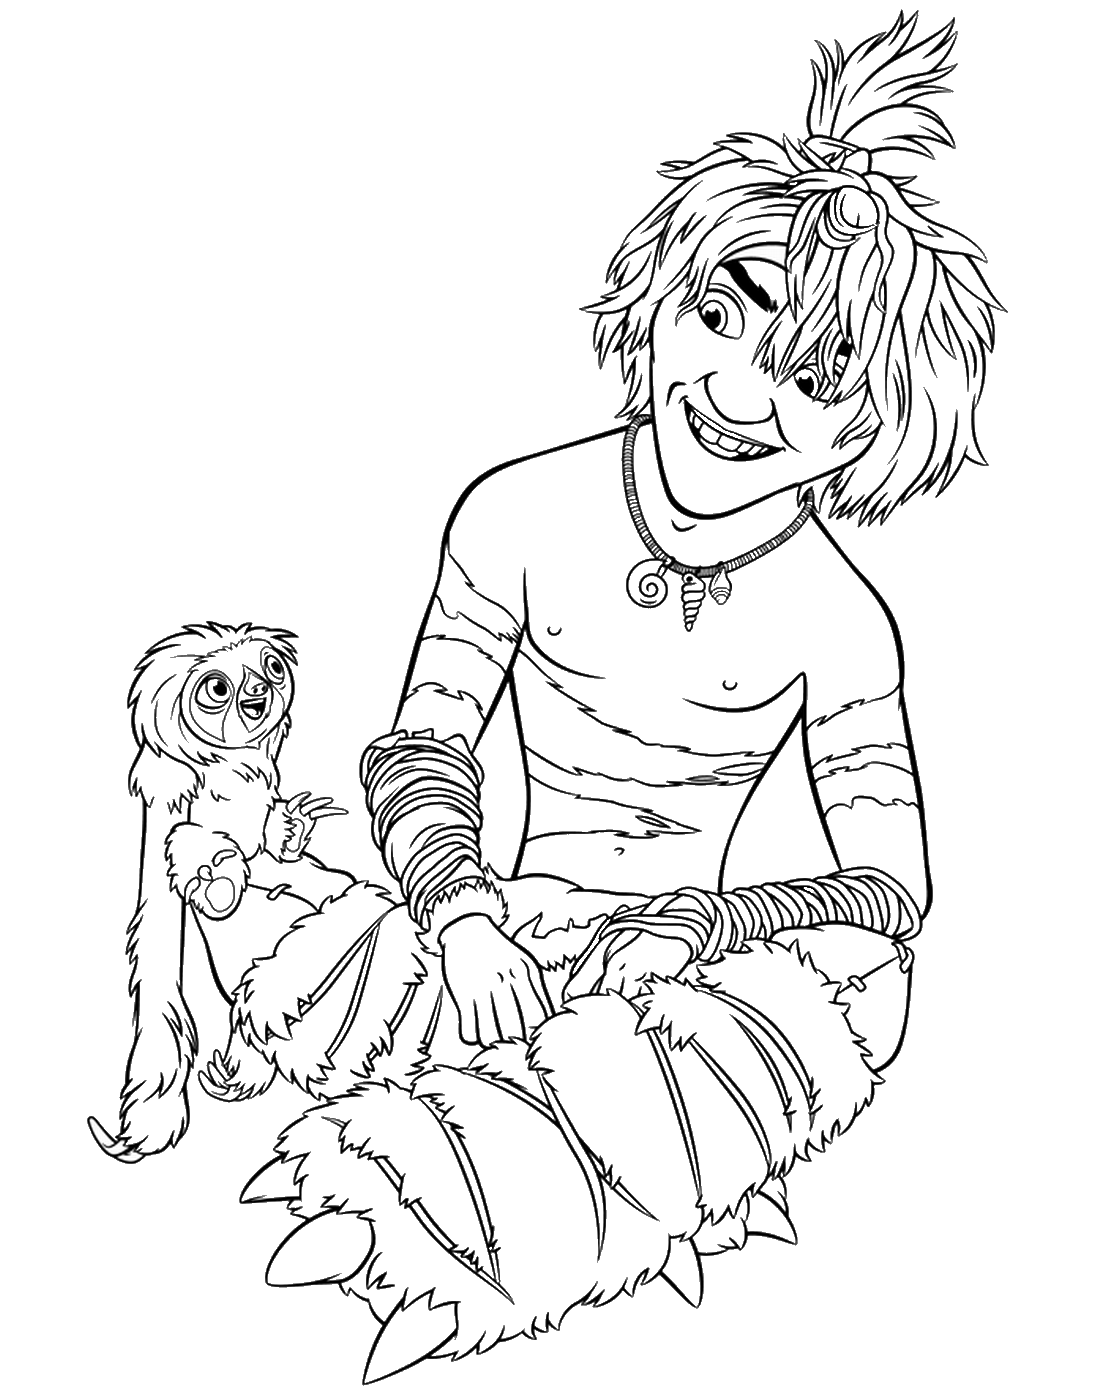 The Croods Coloring Pages TV Film croods_cl_17 Printable 2020 08588 Coloring4free